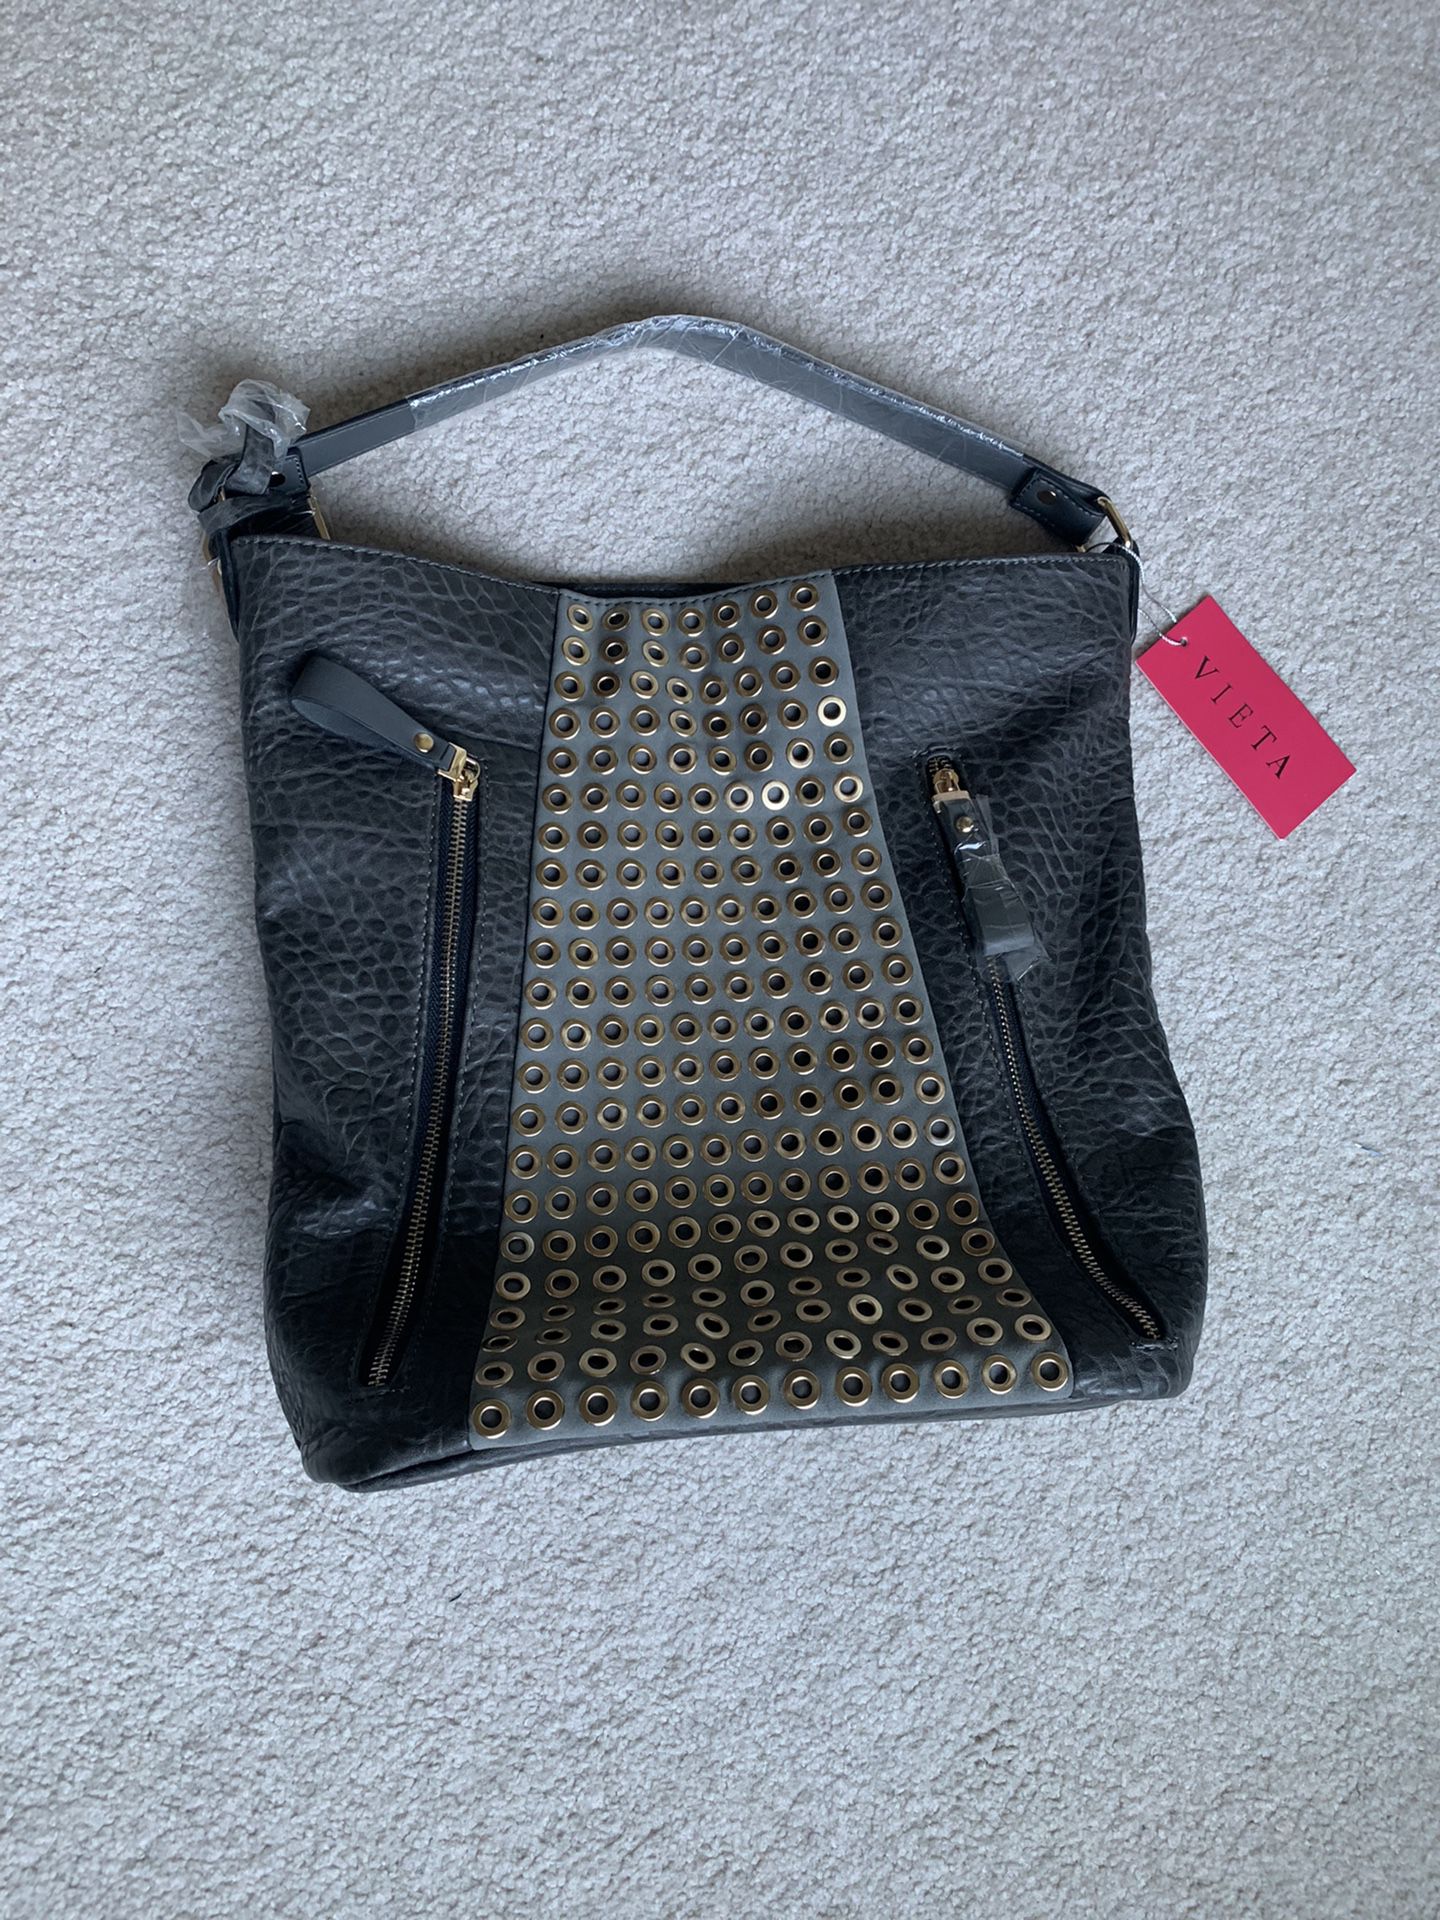 Women’s Handbag, New With Tags And Plastic Wrappings